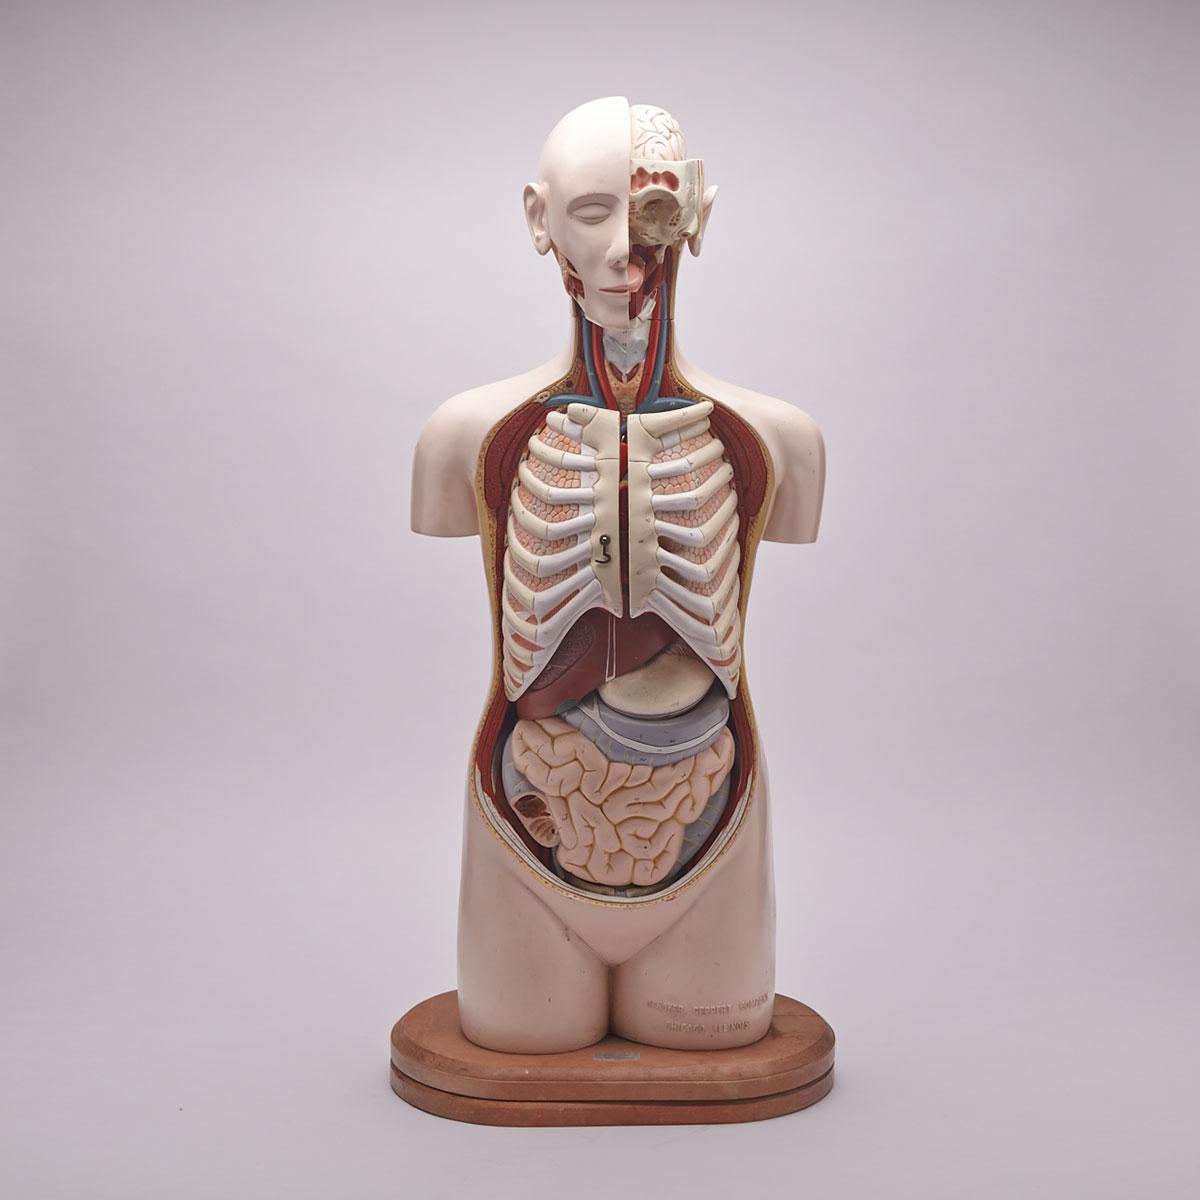 Resin Medical Study Anatomical head and torso model by Denoyer Geppert, Chicago, 1959